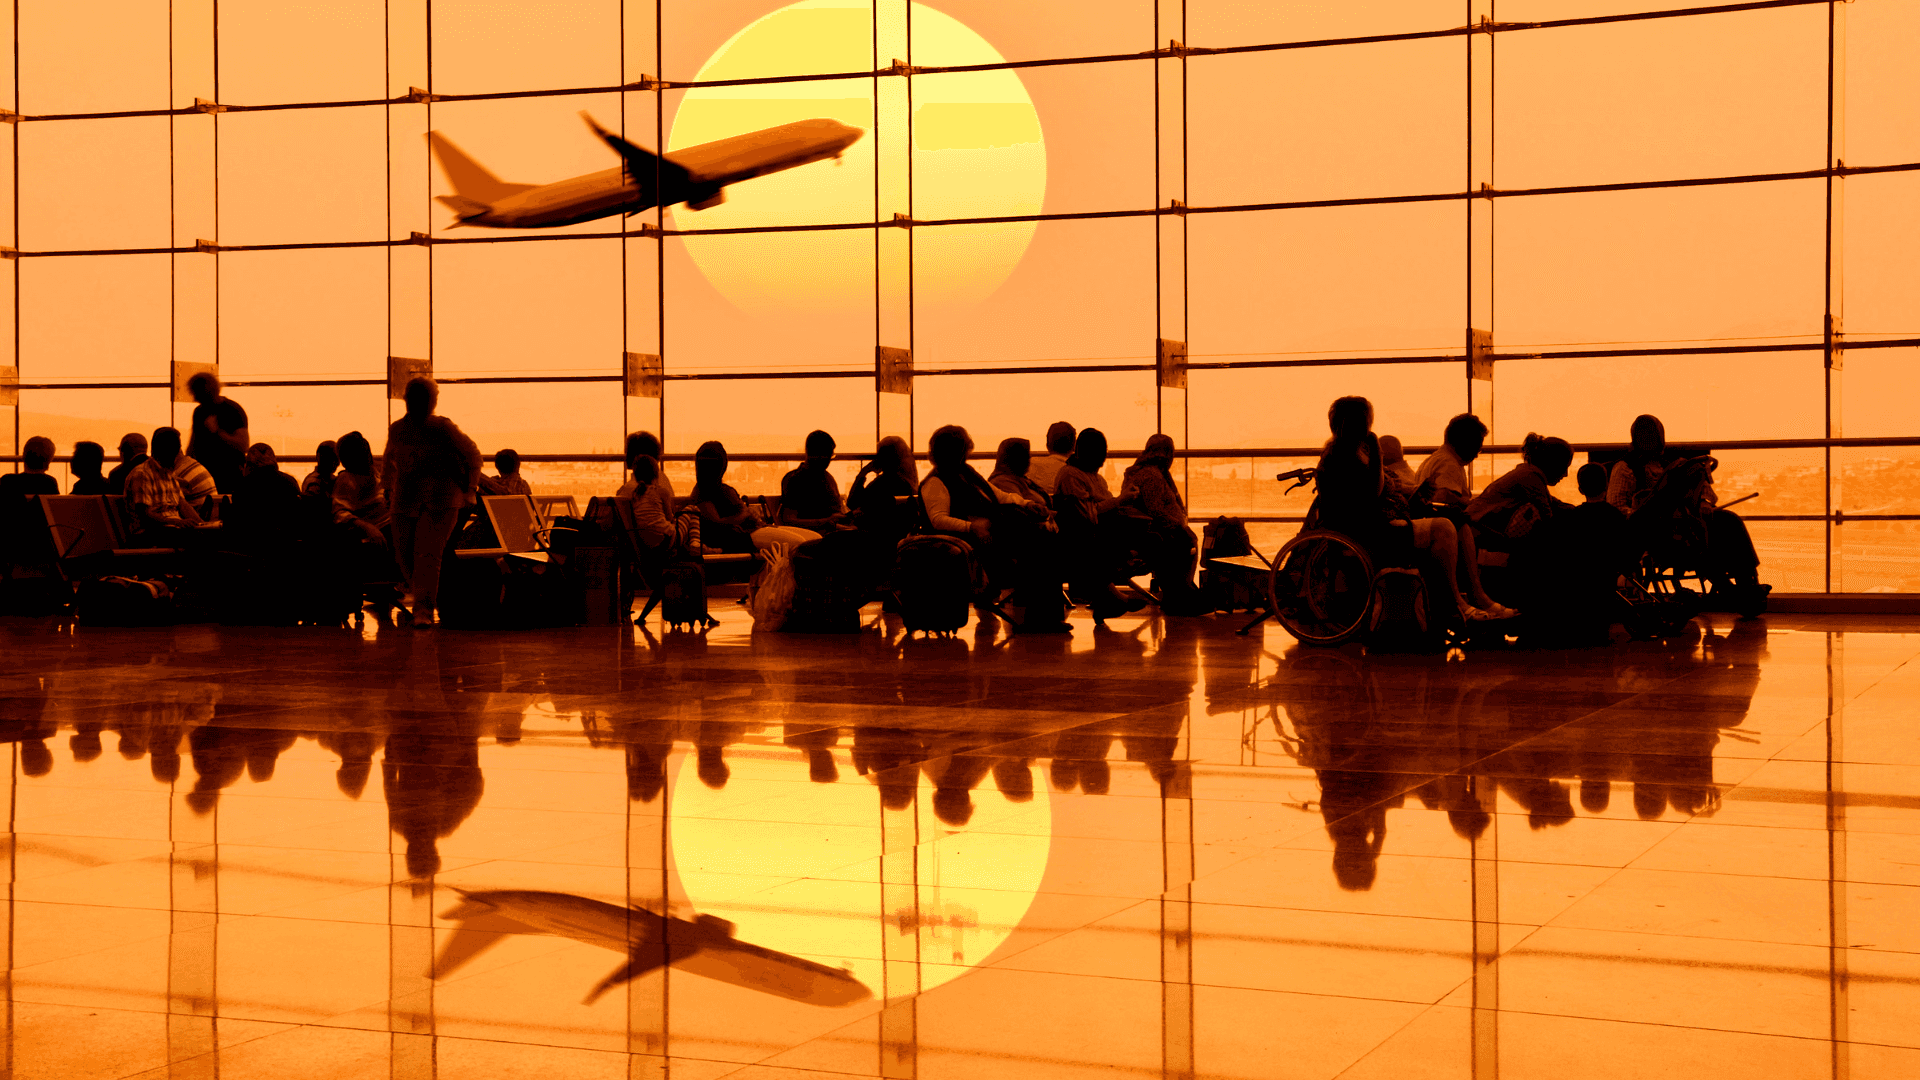 Sunset Airport Waiting Area Silhouettes